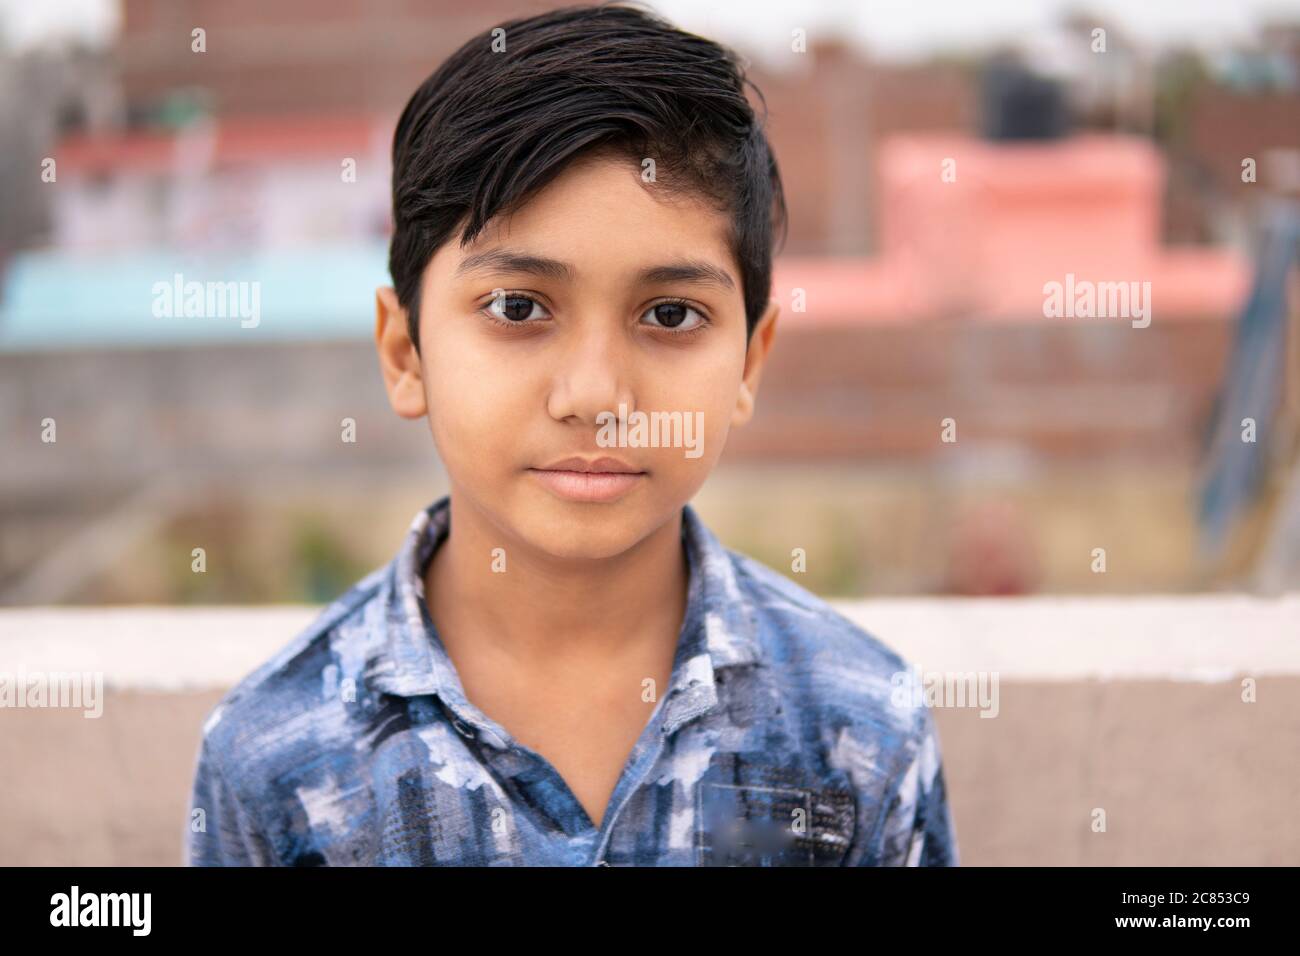 Portrait of little Indian boy looking at camera with blank expression. Stock Photo